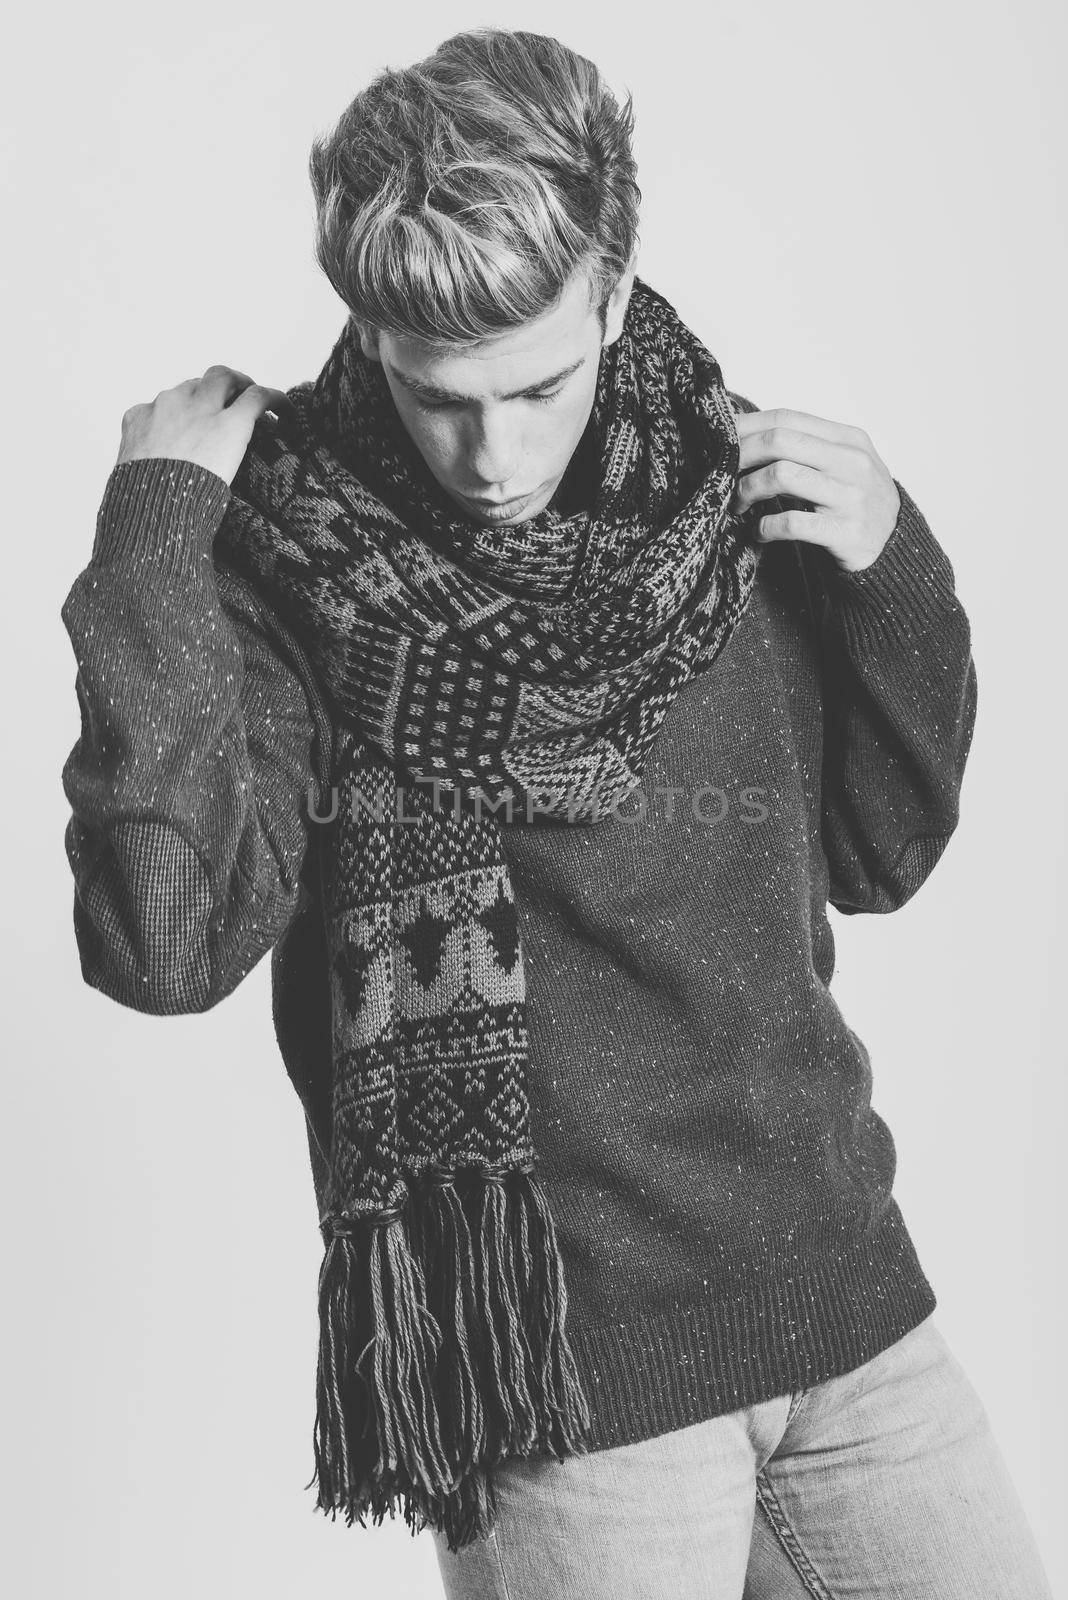 Handsome blonde man wearing sweater and scarf by javiindy